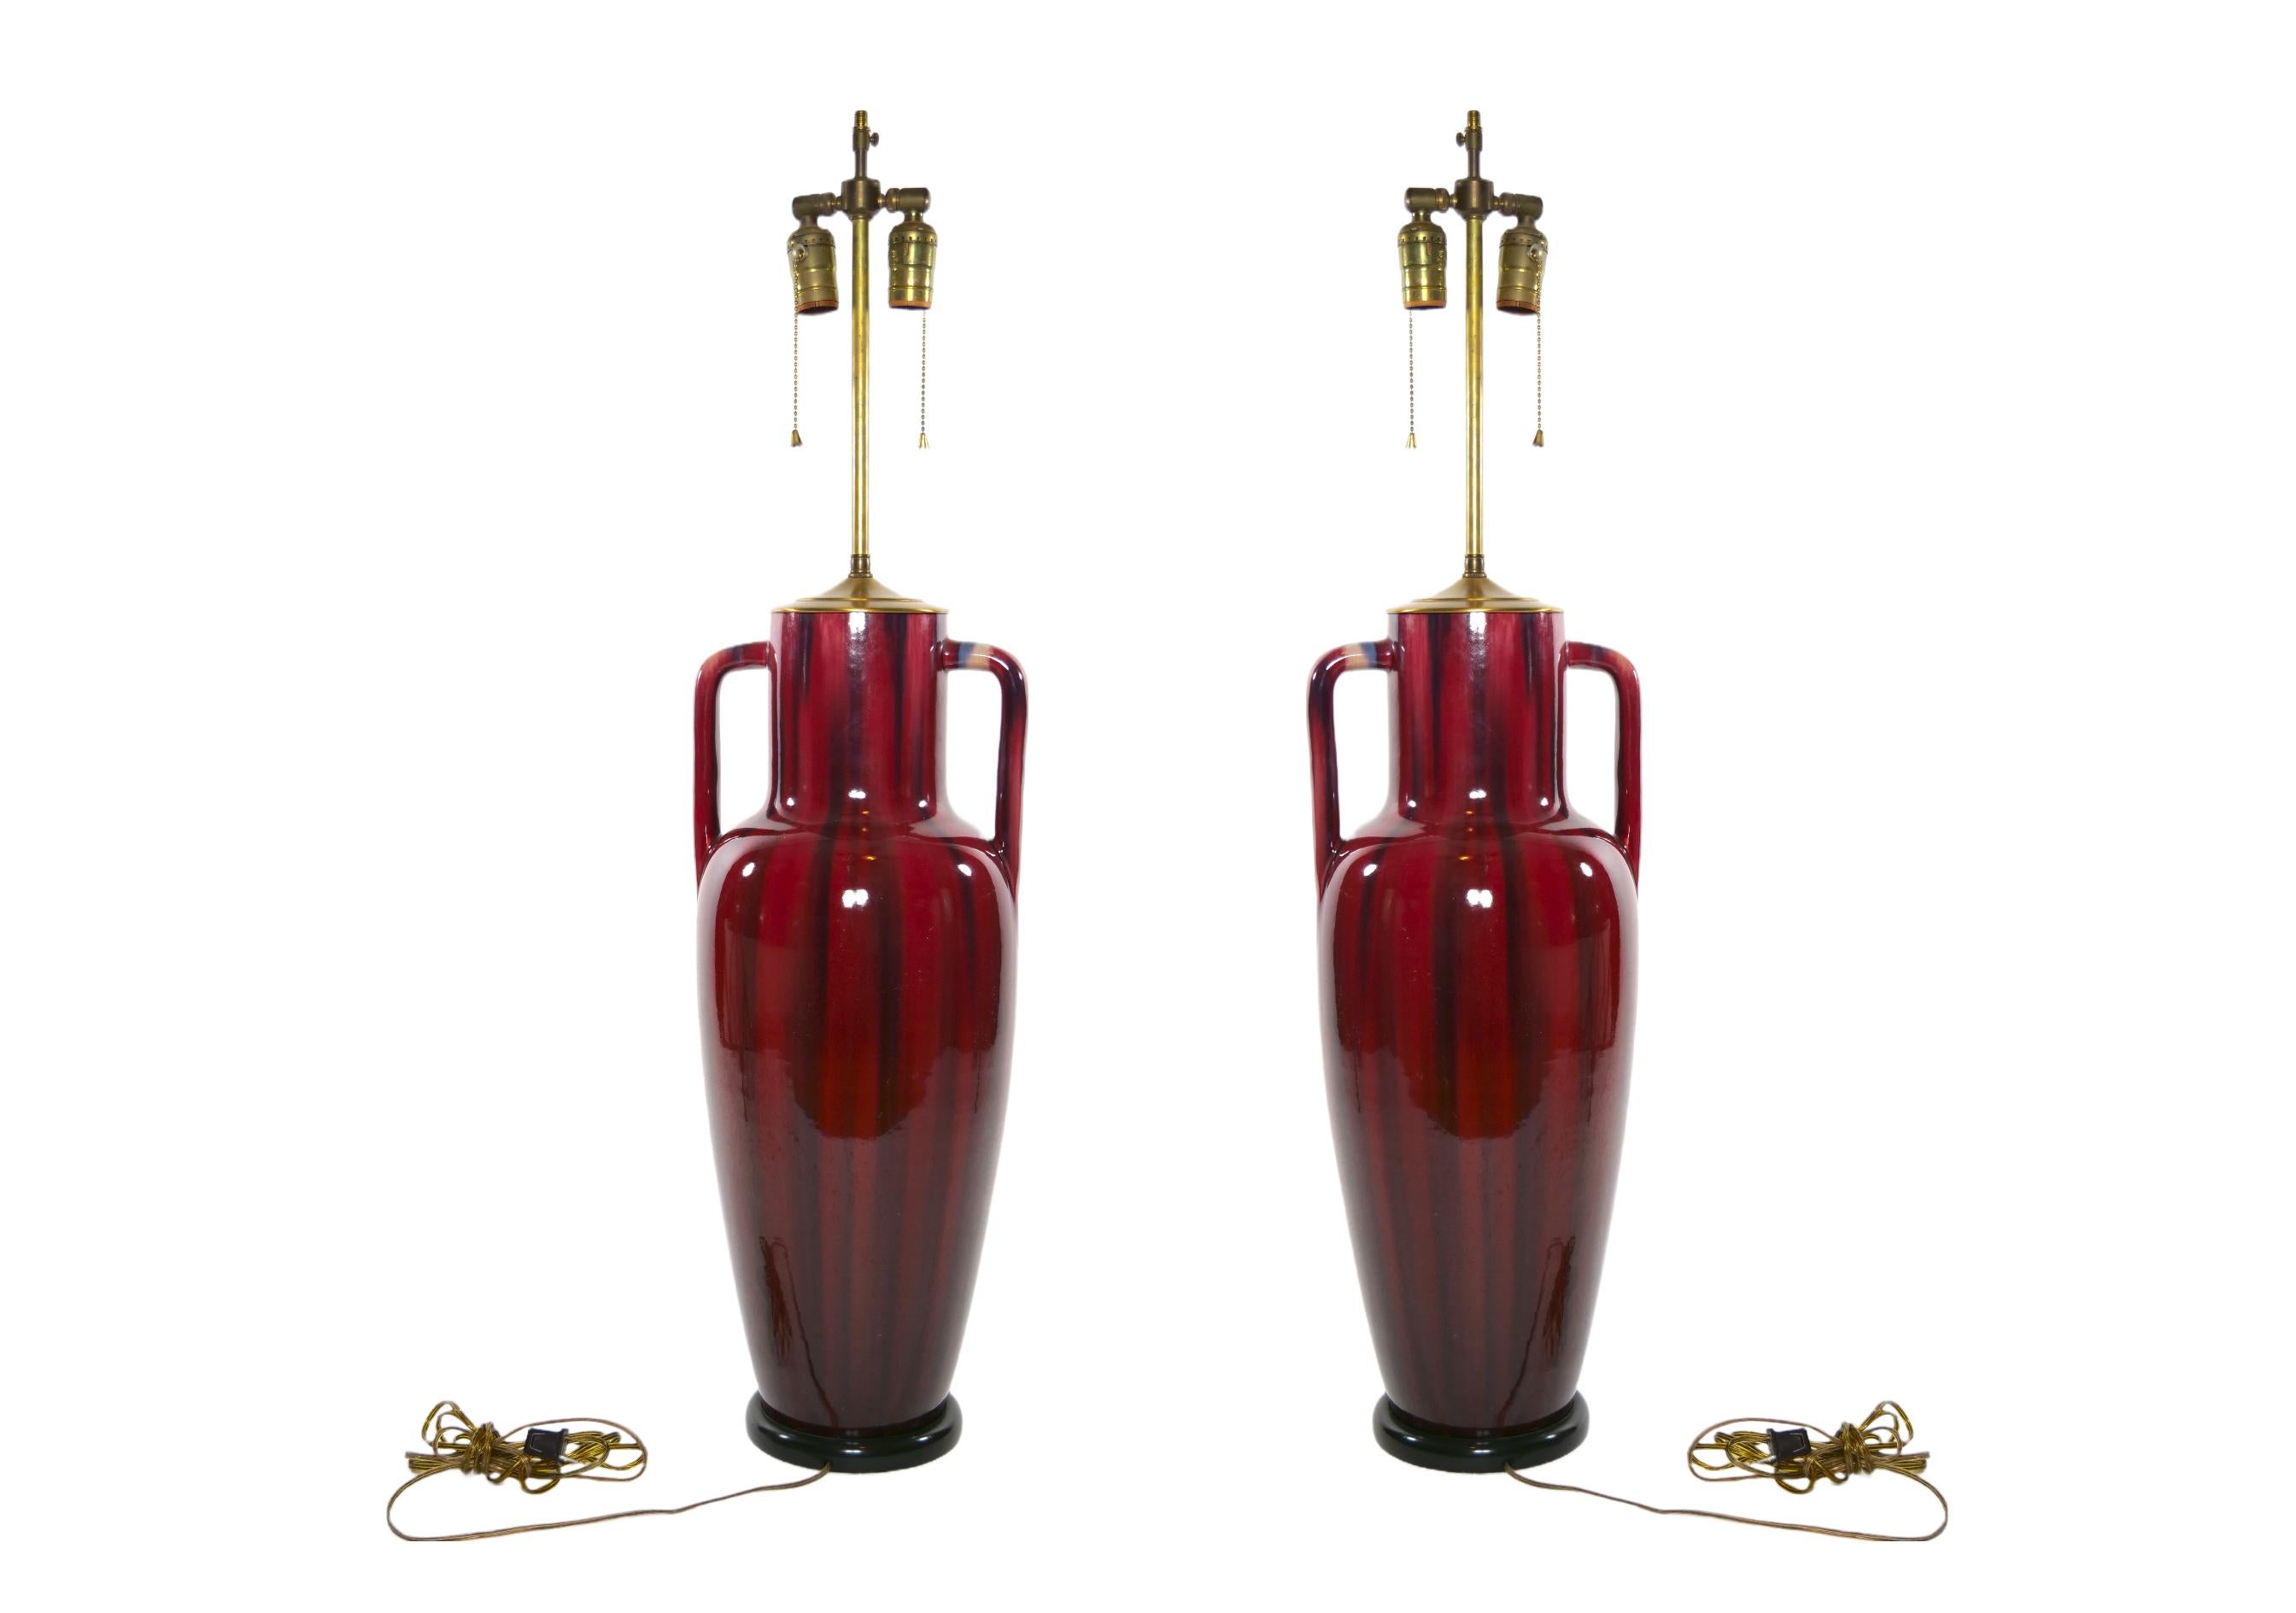 Pair glazed flambe porcelain with black wood base decorative temple jar vases mounted as table lamps. Each lamp features a narrow temple neck with two side handles resting on a round wood base. Each lamp is in good working condition. Minor wear